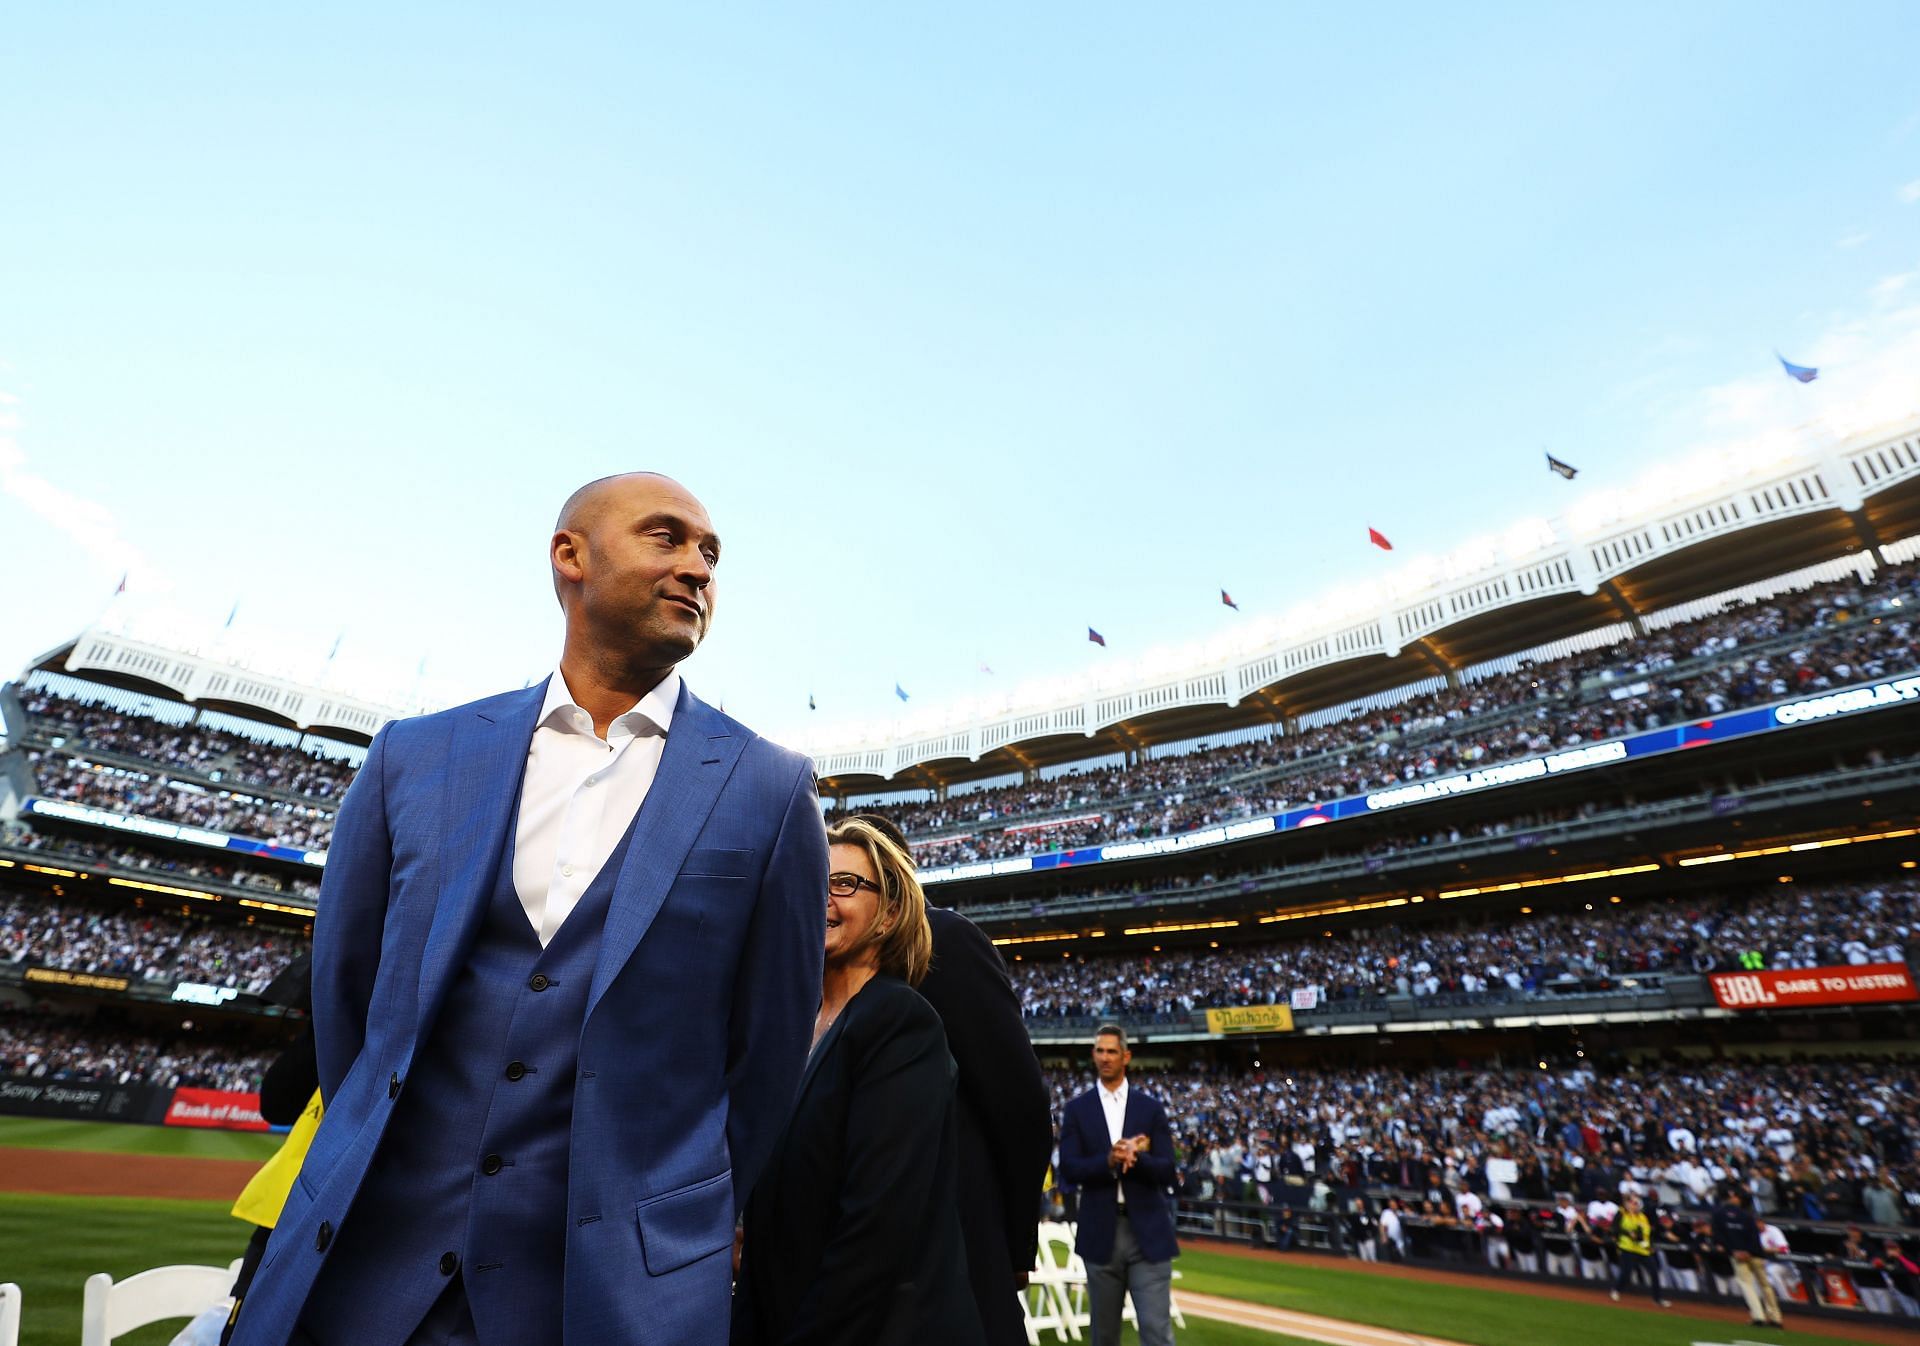 Derek Jeter looks during the retirement ceremony of his number 2 jersey at Yankee Stadium